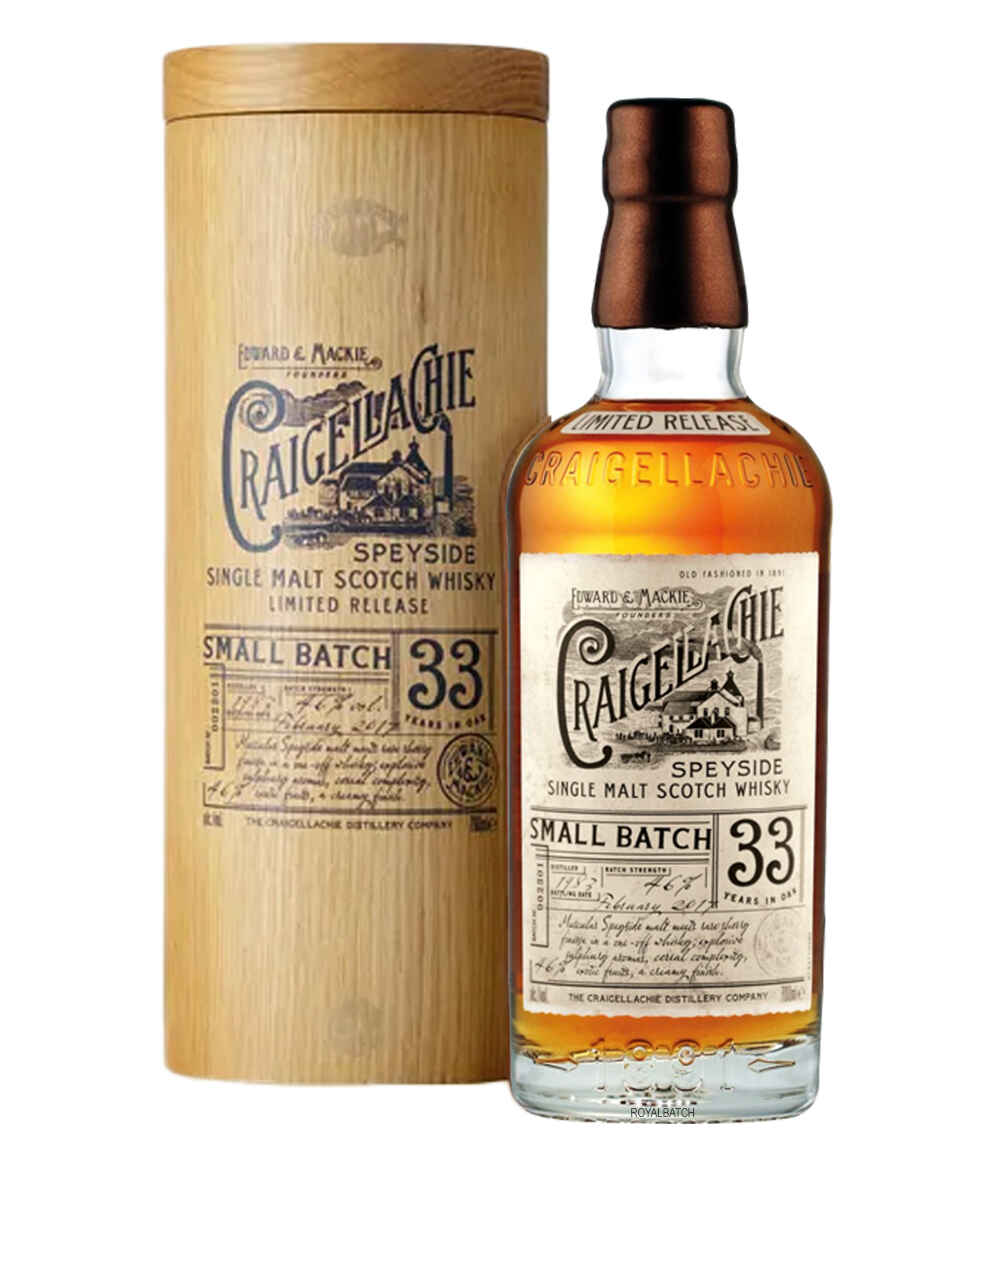 Craigellachie 33 Year Old Small Batch Limited Release Single Malt Scotch Whisky